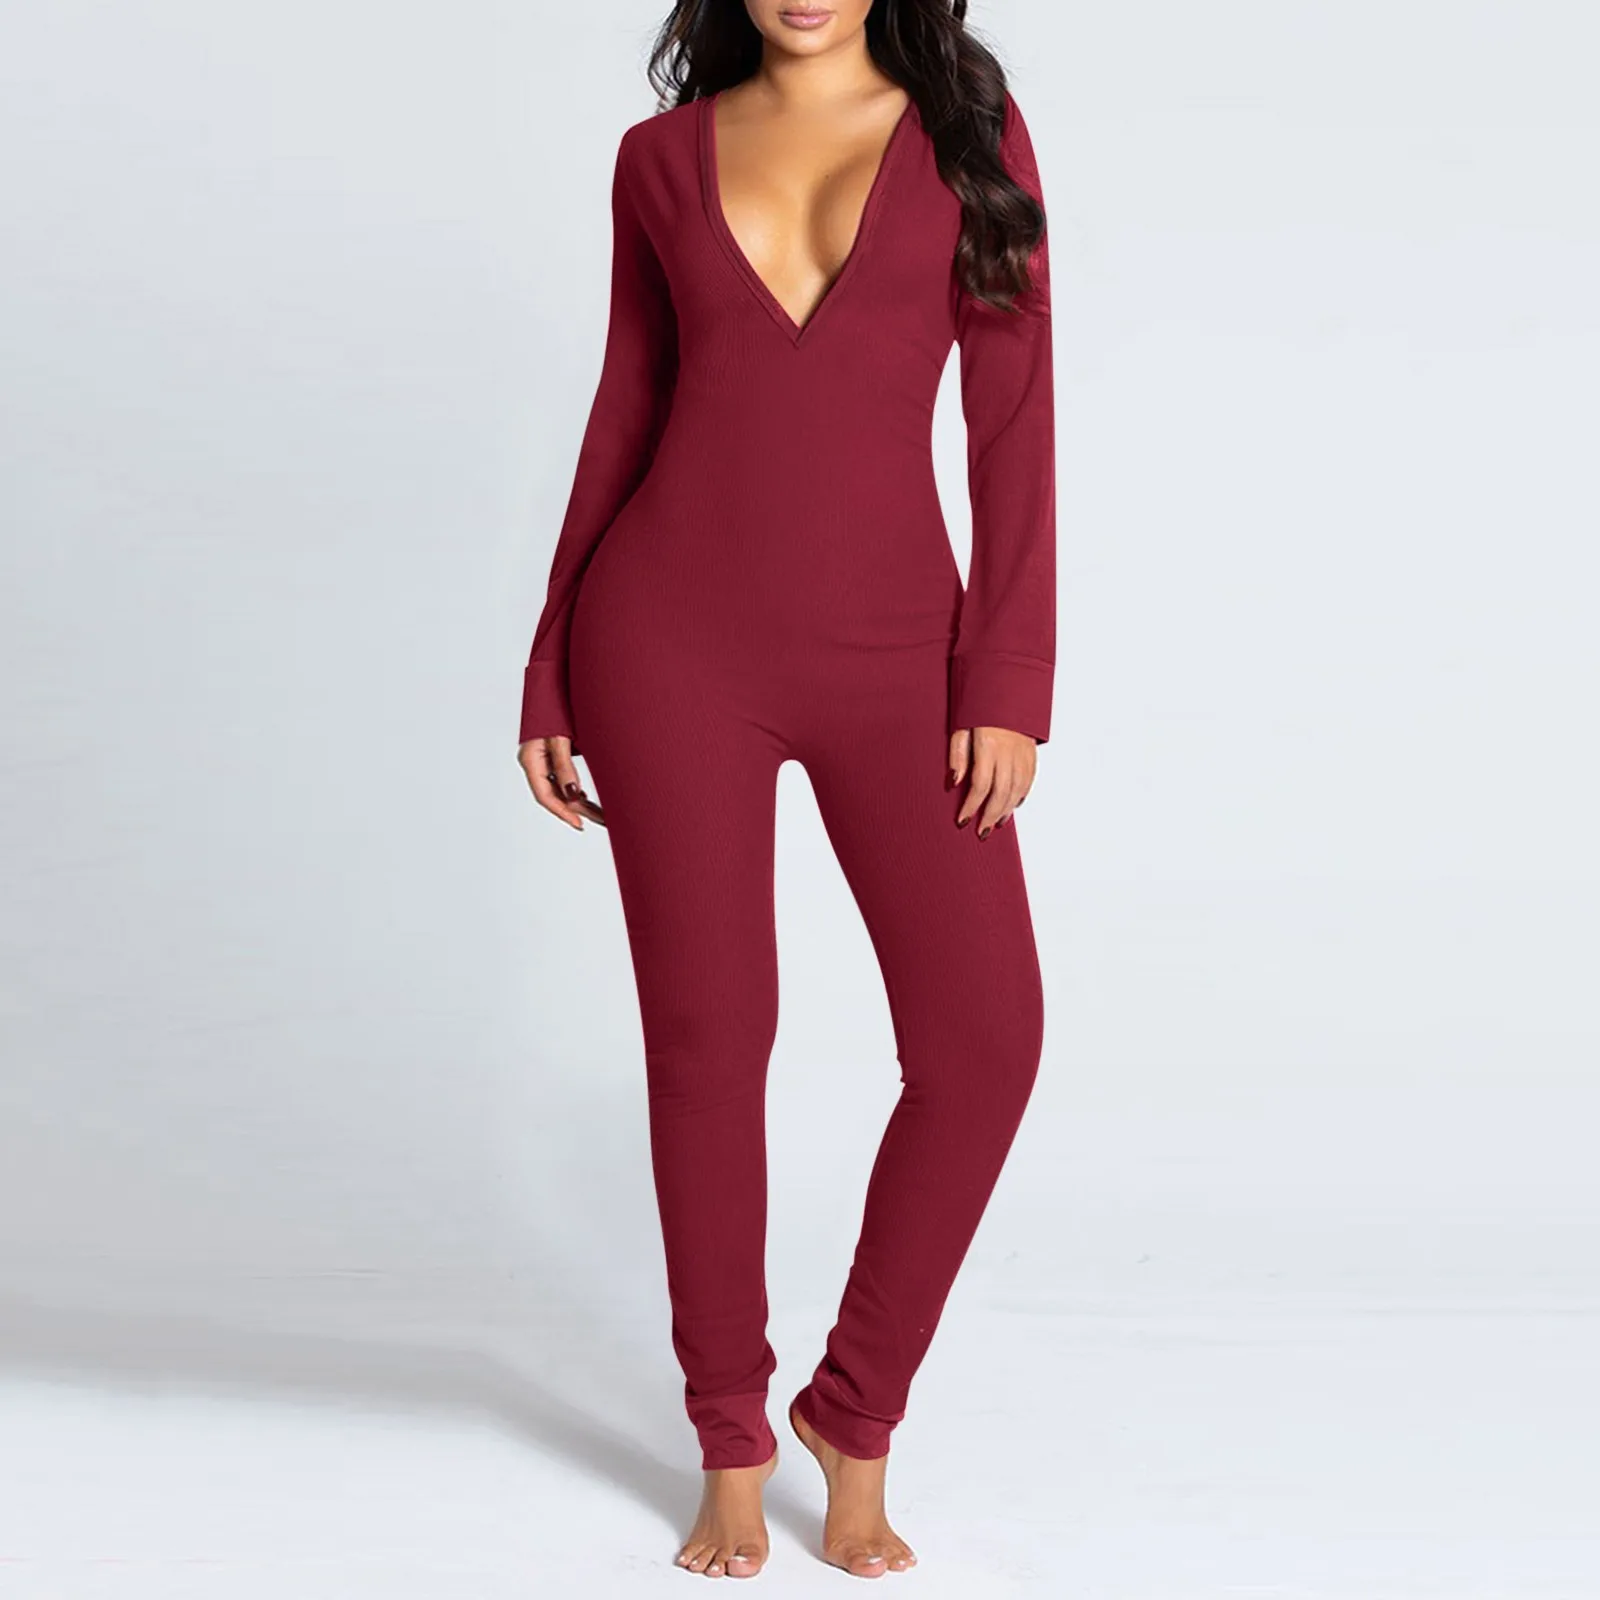 

Sexy Onesies For Adults Autumn Winter Long Sleeve Jumpsuit Women'S Onesie Pajama Button Up Romper Solid Romper Playsuit Bodysuit